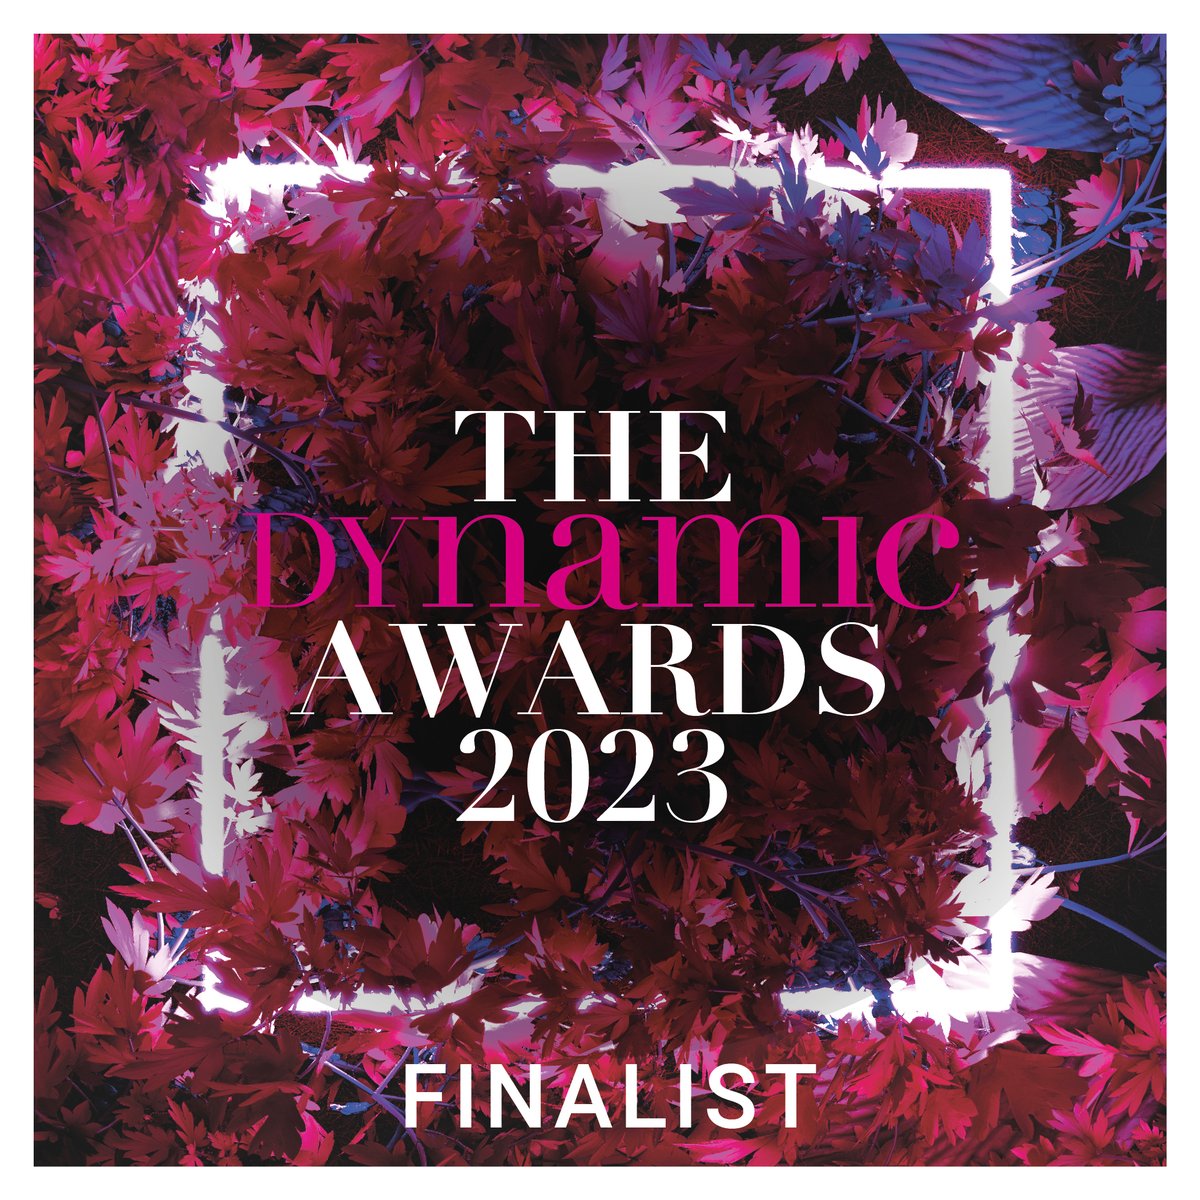 We're thrilled that our Chief Executive, Sally Chalk, has been nominated for Innovator of the Year at the 2023 Dynamic Awards!

#WomenInBusiness #DynamicAwards
@DynamicWomenUK @PlatBusMag